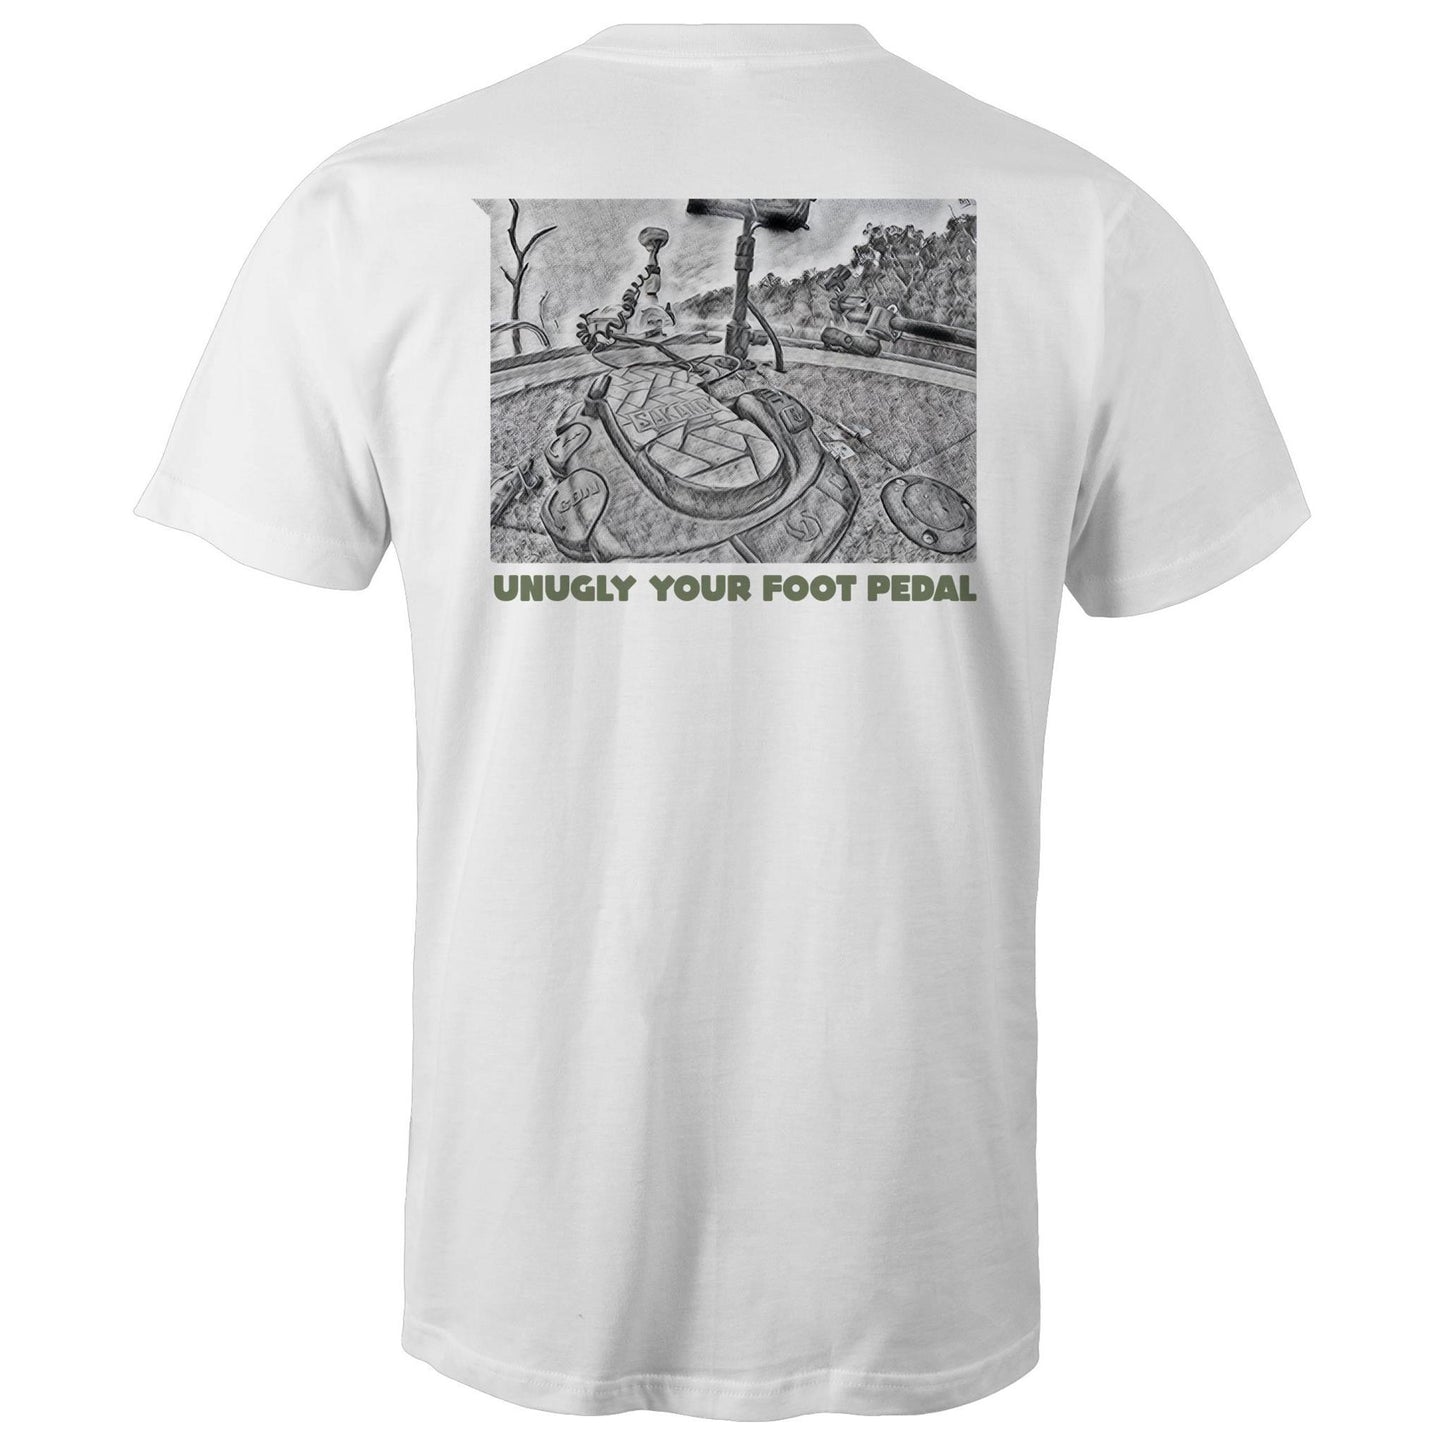 Men's Charcoal Drawing Tee